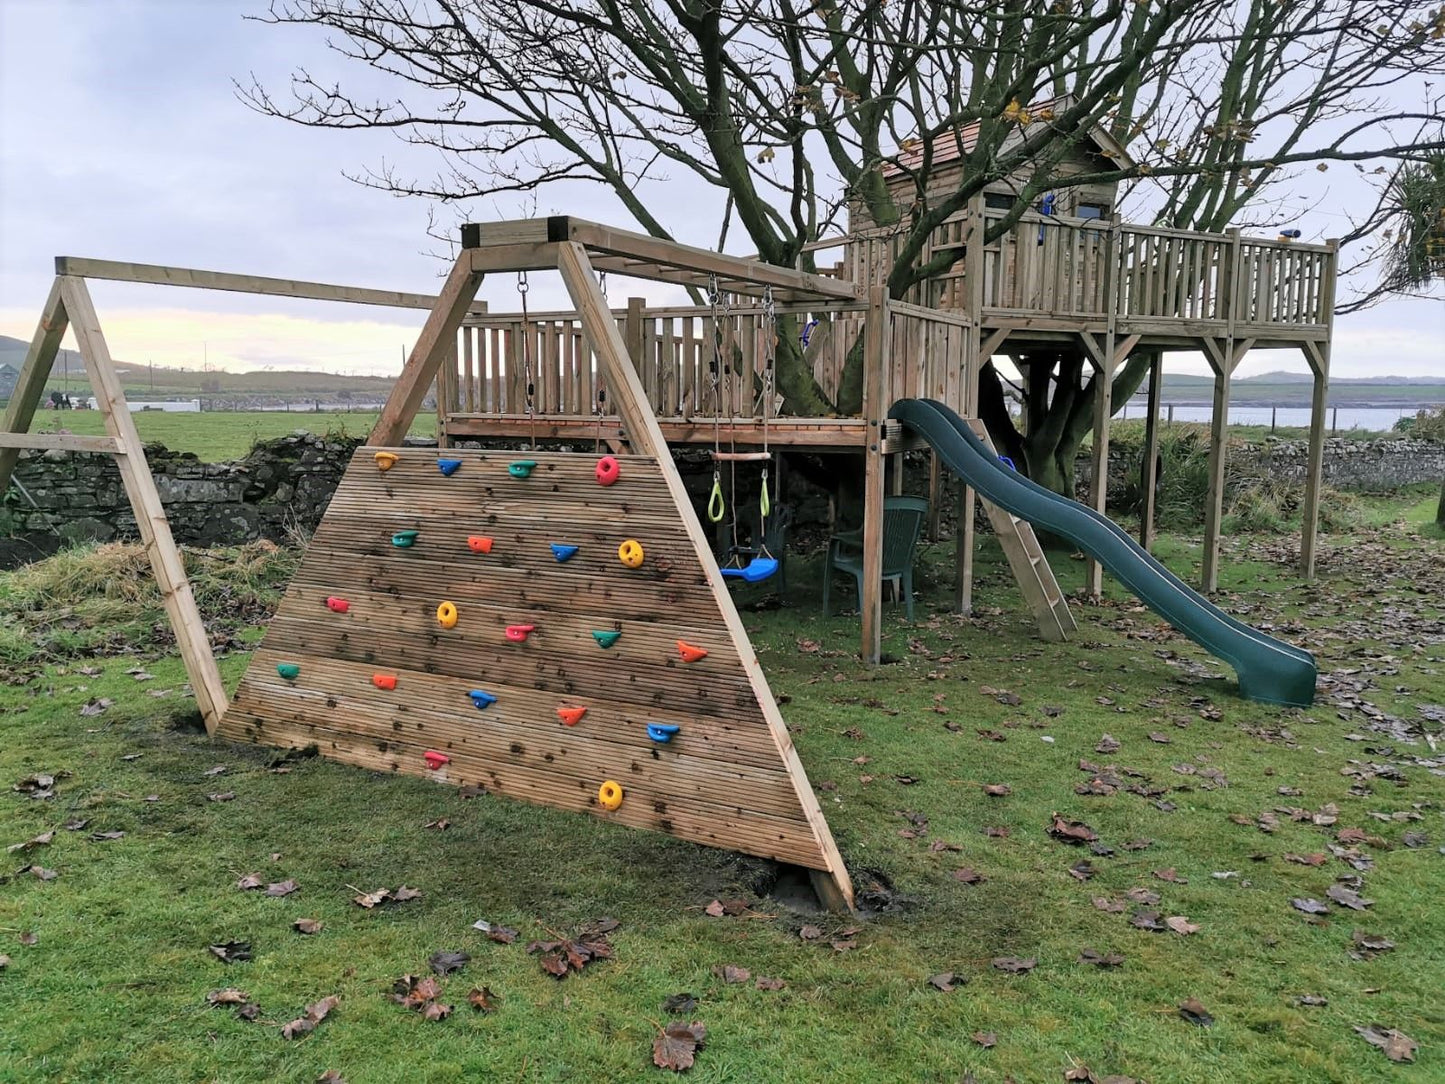 The Cliffs of Moher tree house climbing Frame